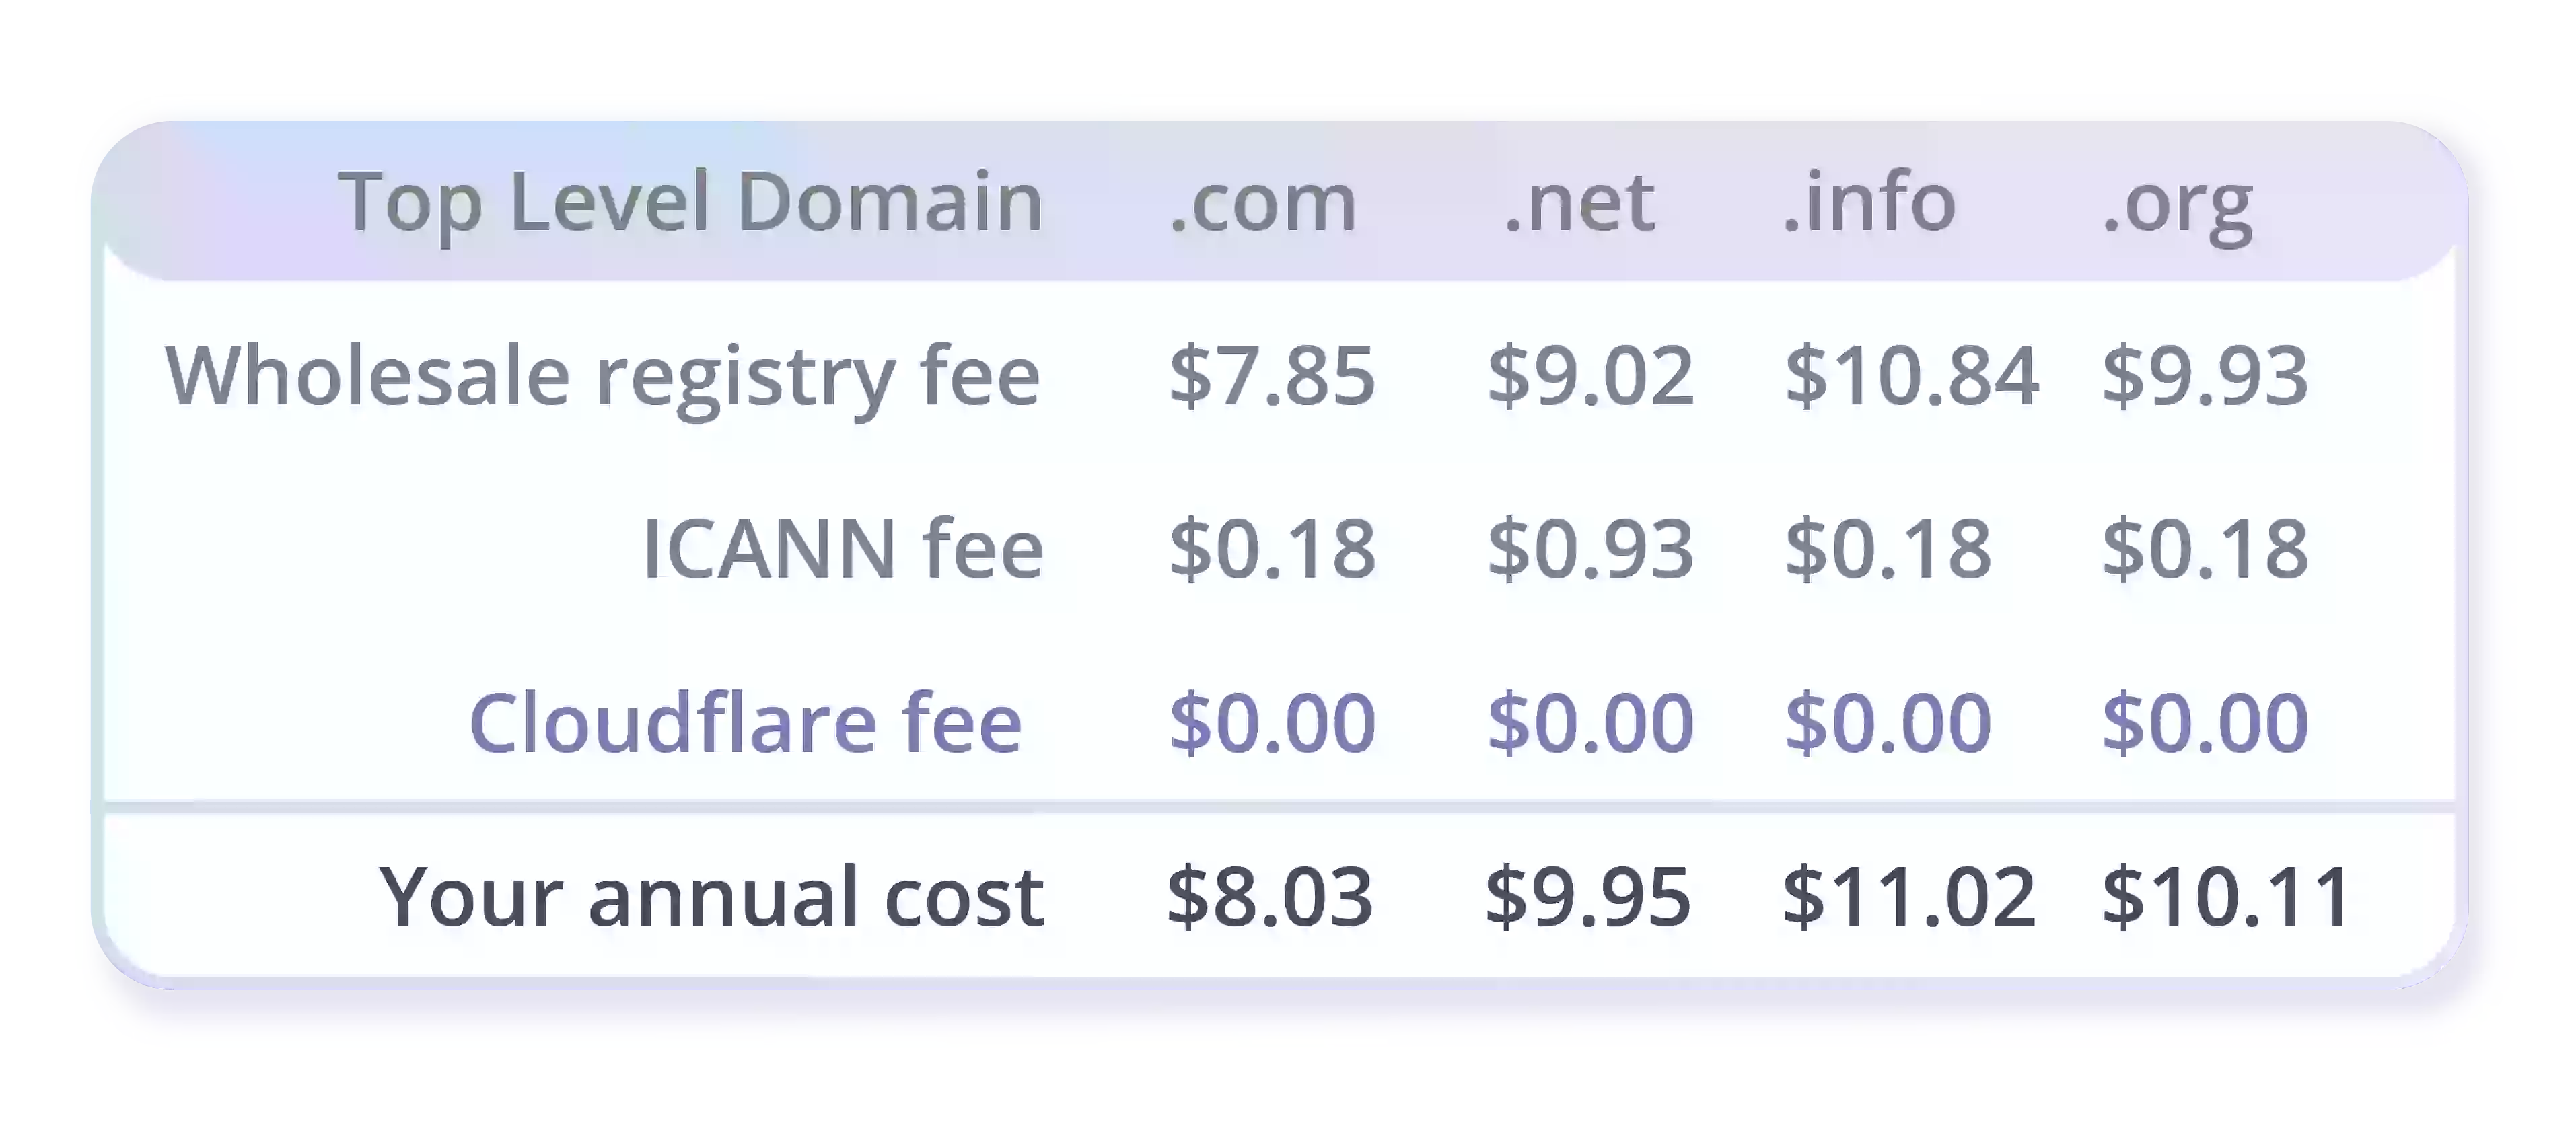 Image showing costs